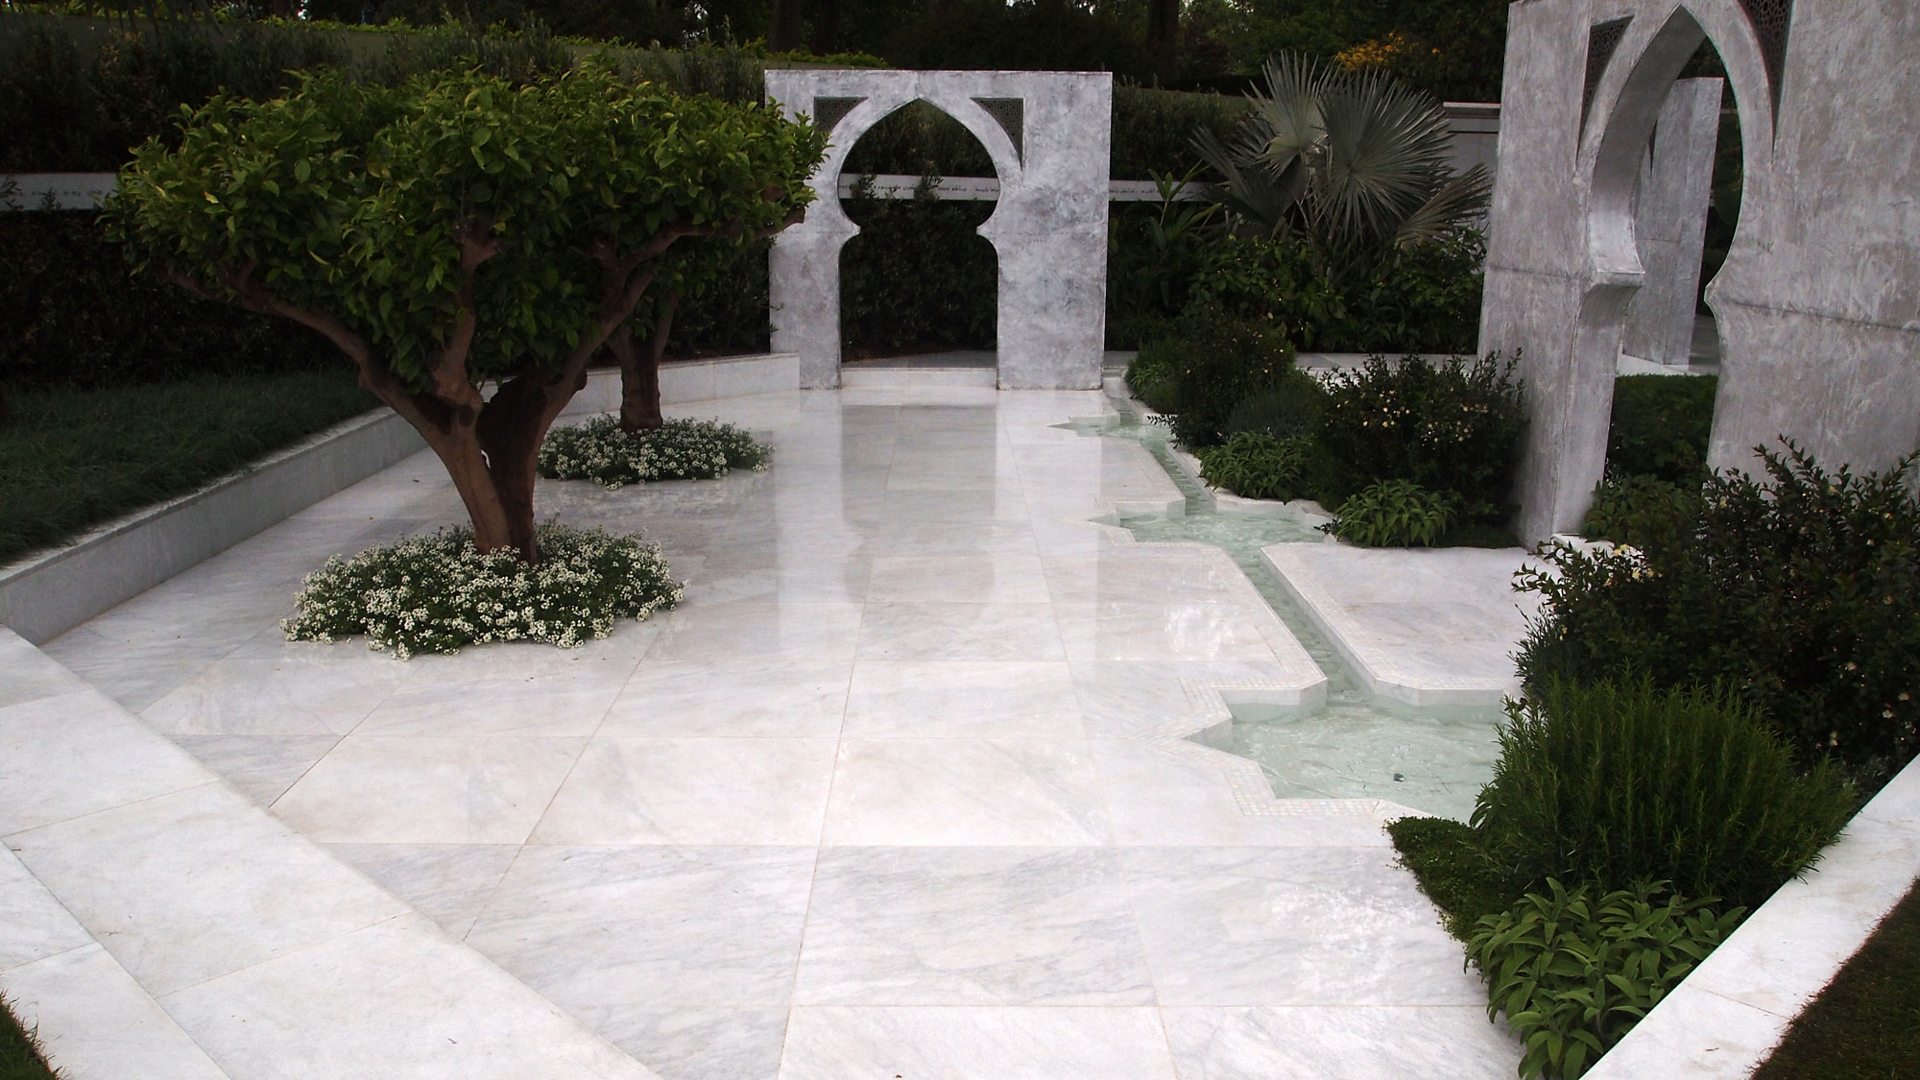 bbc two - rhs chelsea flower show - the beauty of islam garden